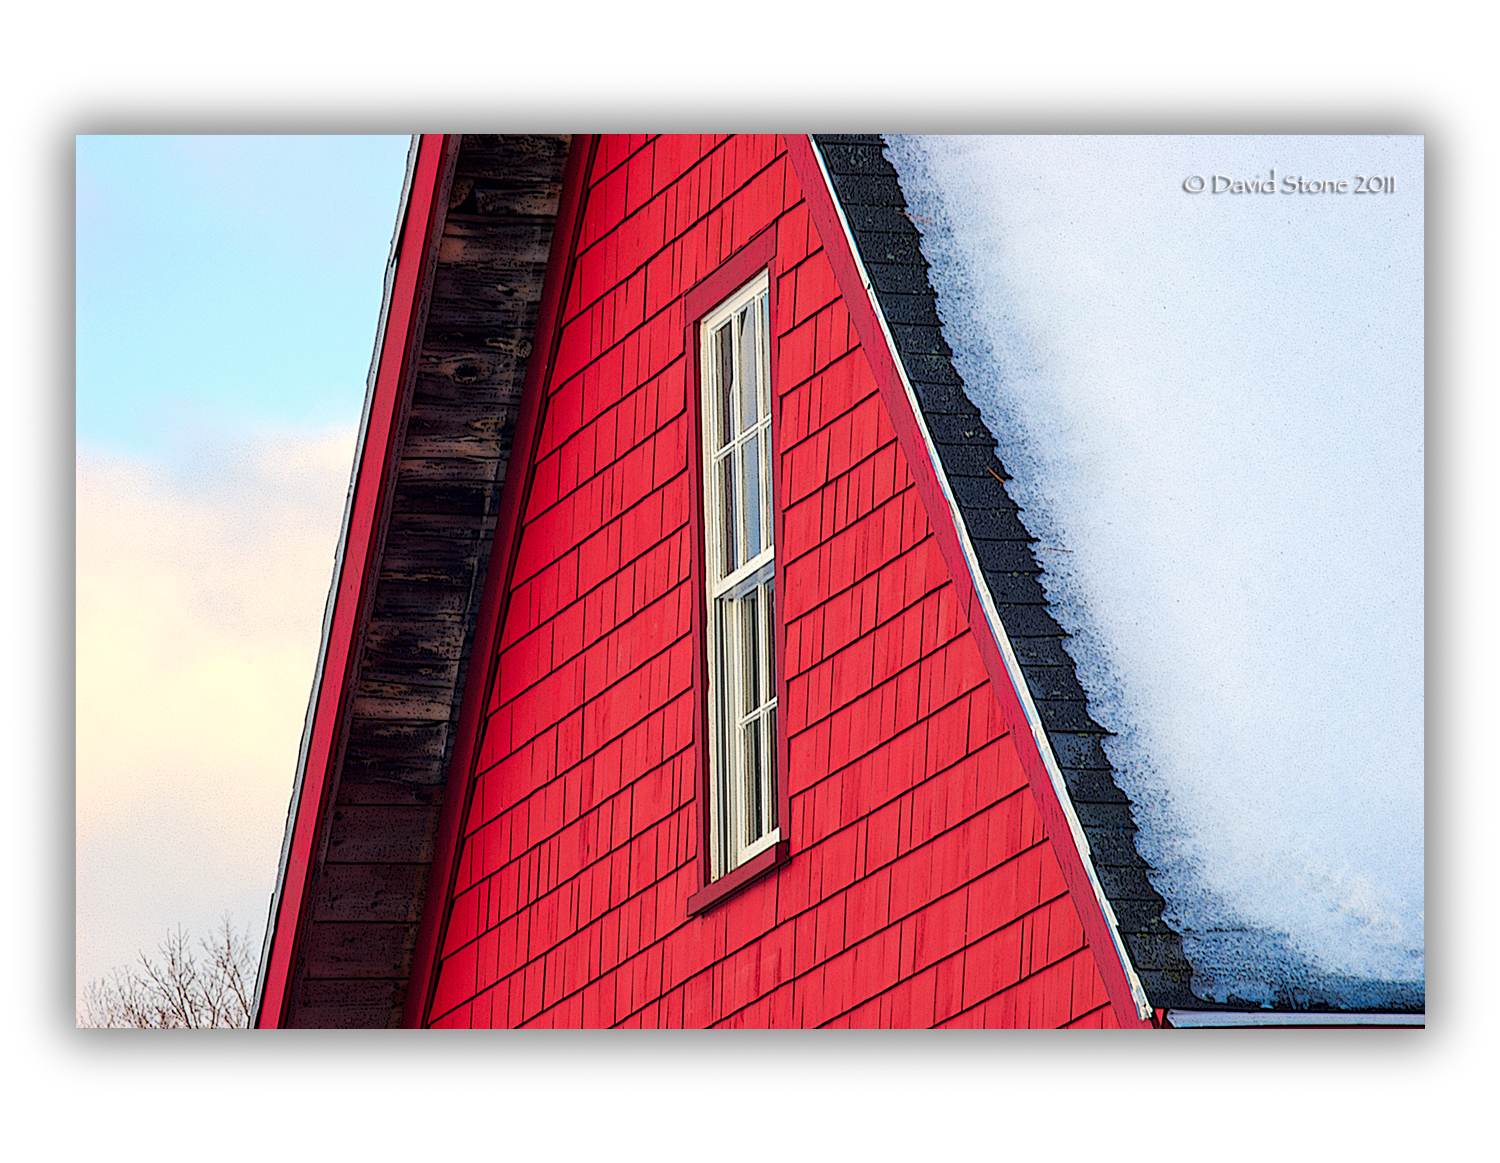 Window In The Red Barn At Appleton Farm (user submitted)